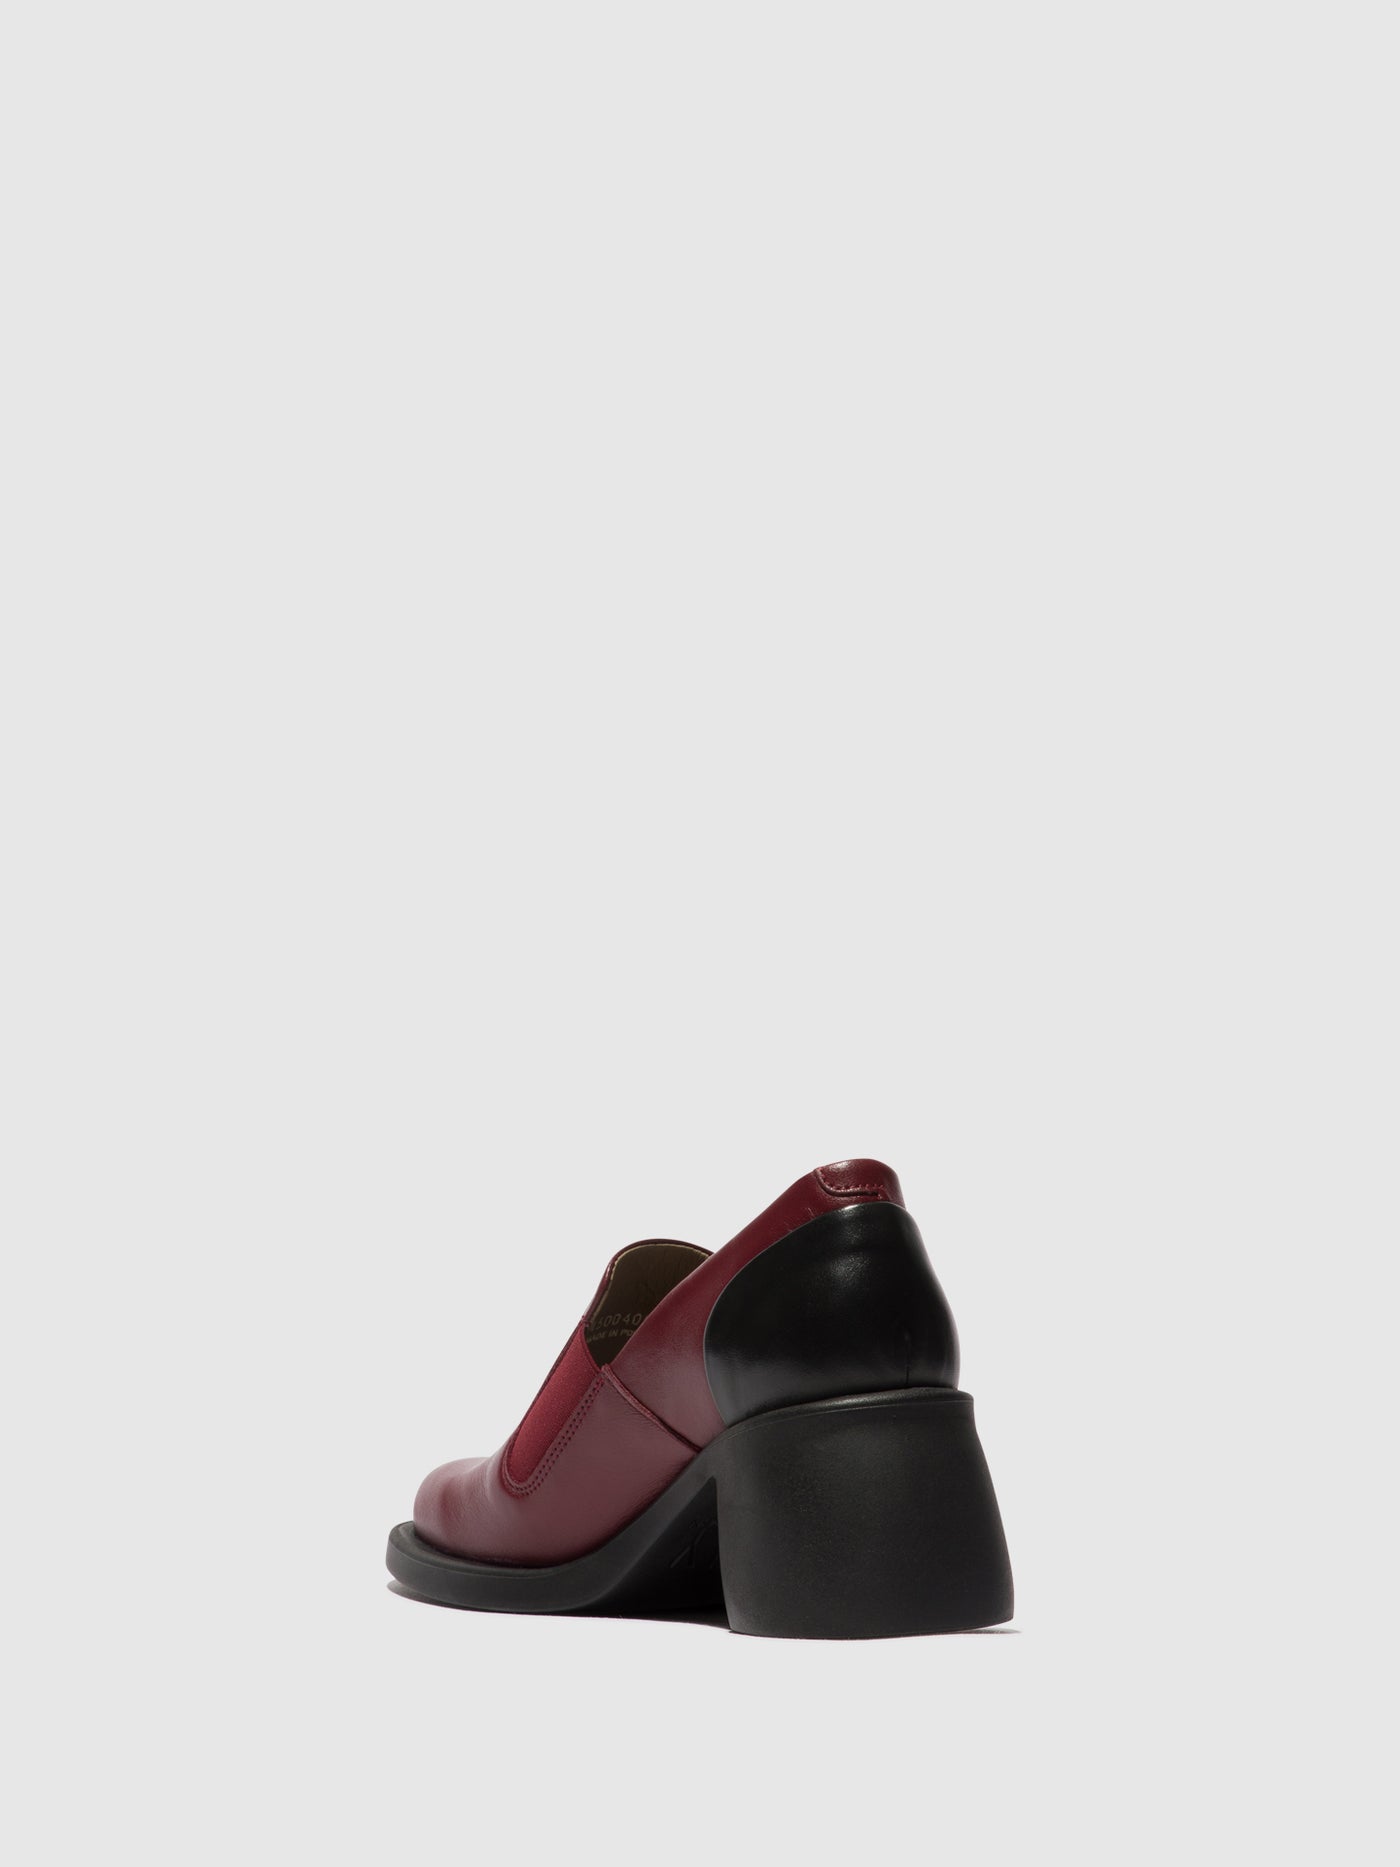 Slip-on Shoes HUCH004FLY WINE/BLACK